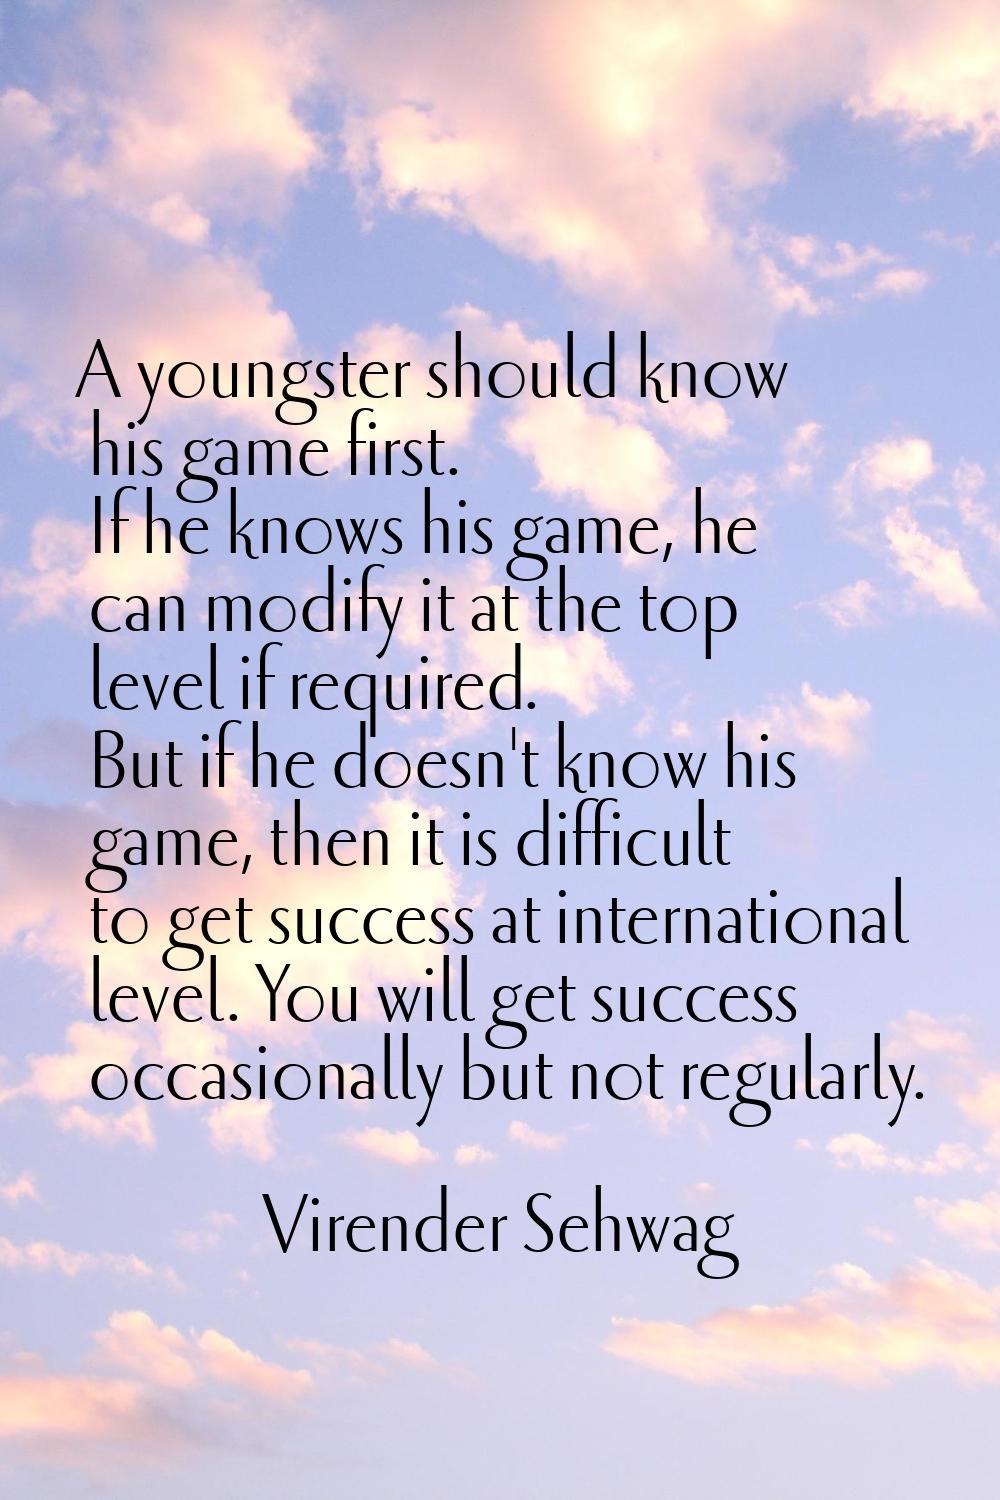 A youngster should know his game first. If he knows his game, he can modify it at the top level if 